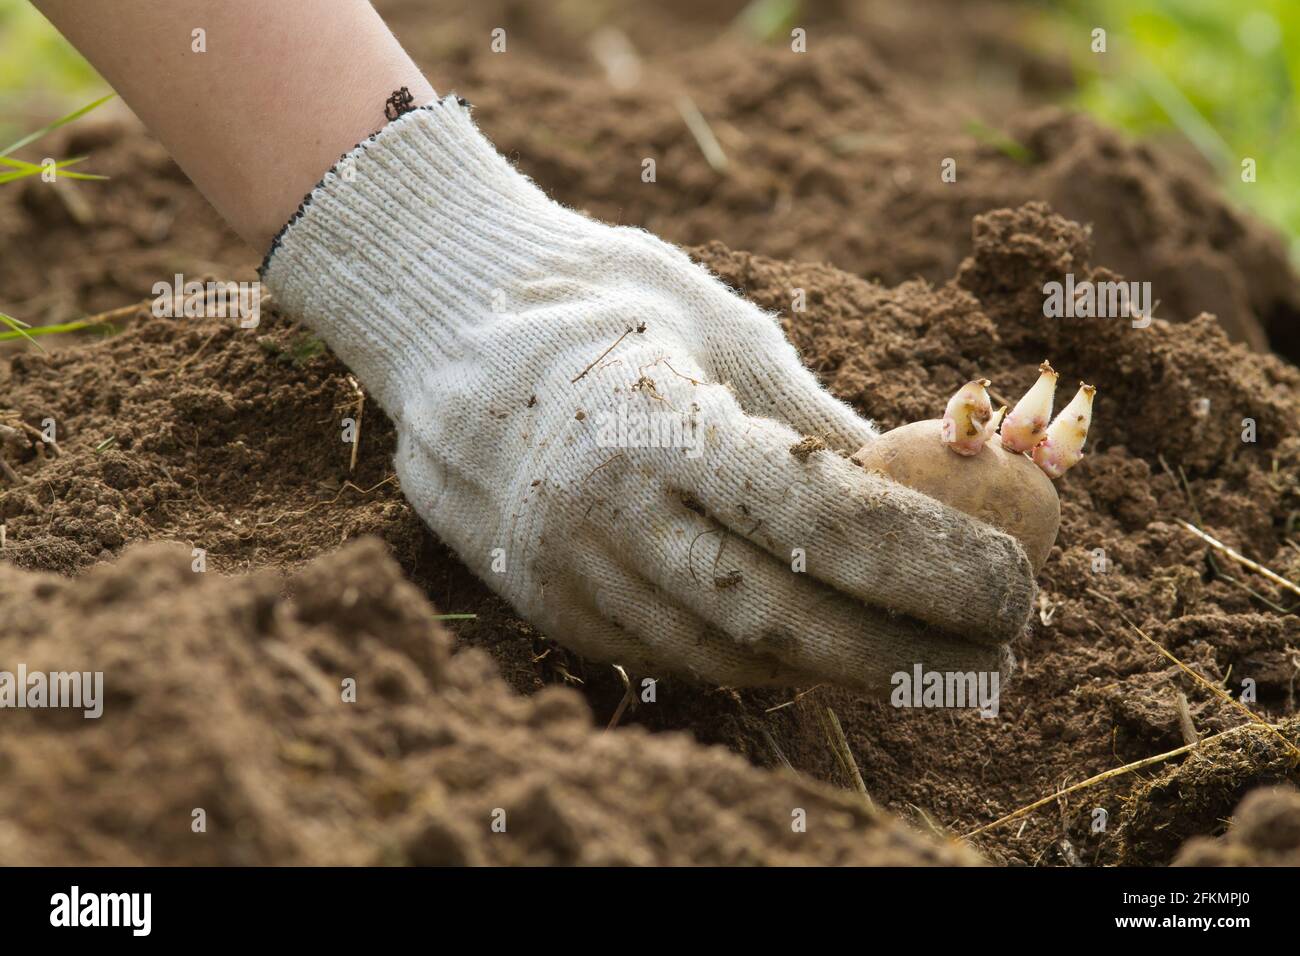 the hand of the gardener lowers the potato tuber in the hole in the vegetable garden Stock Photo